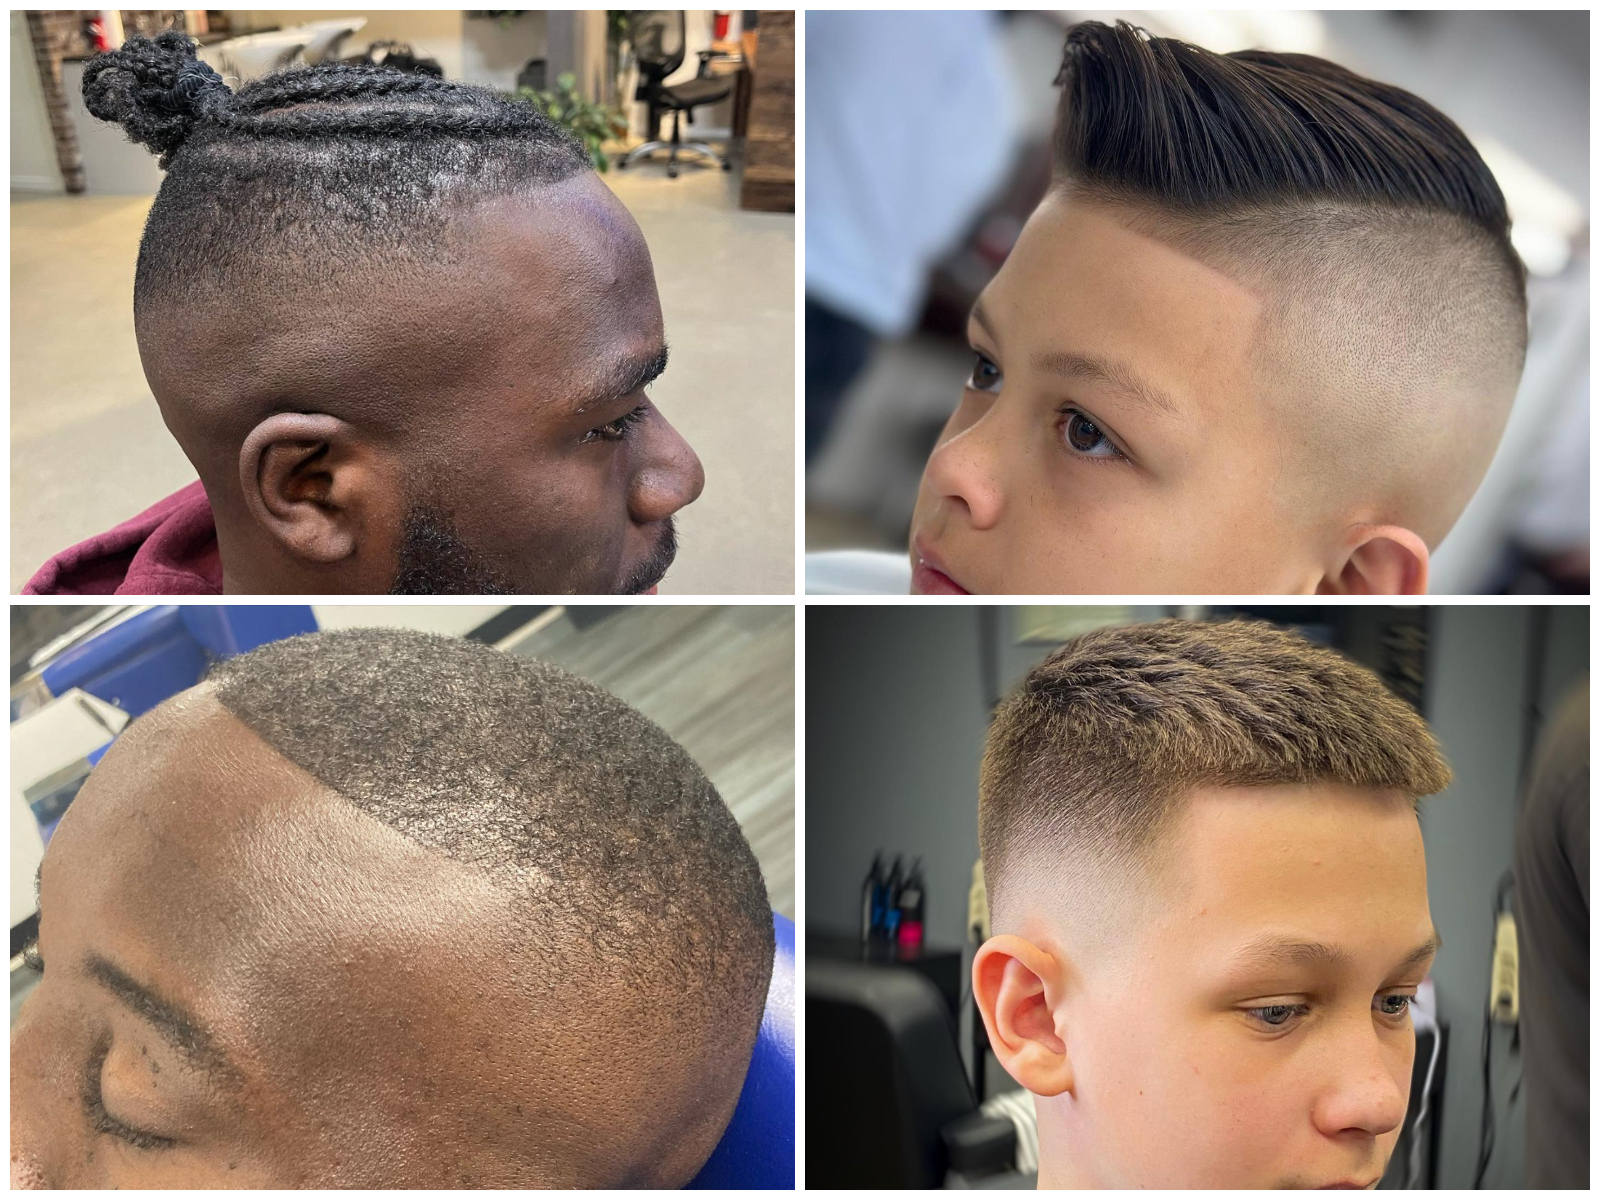 23 High and Tight Haircuts for Men [IMAGES] - WiseBarber.com